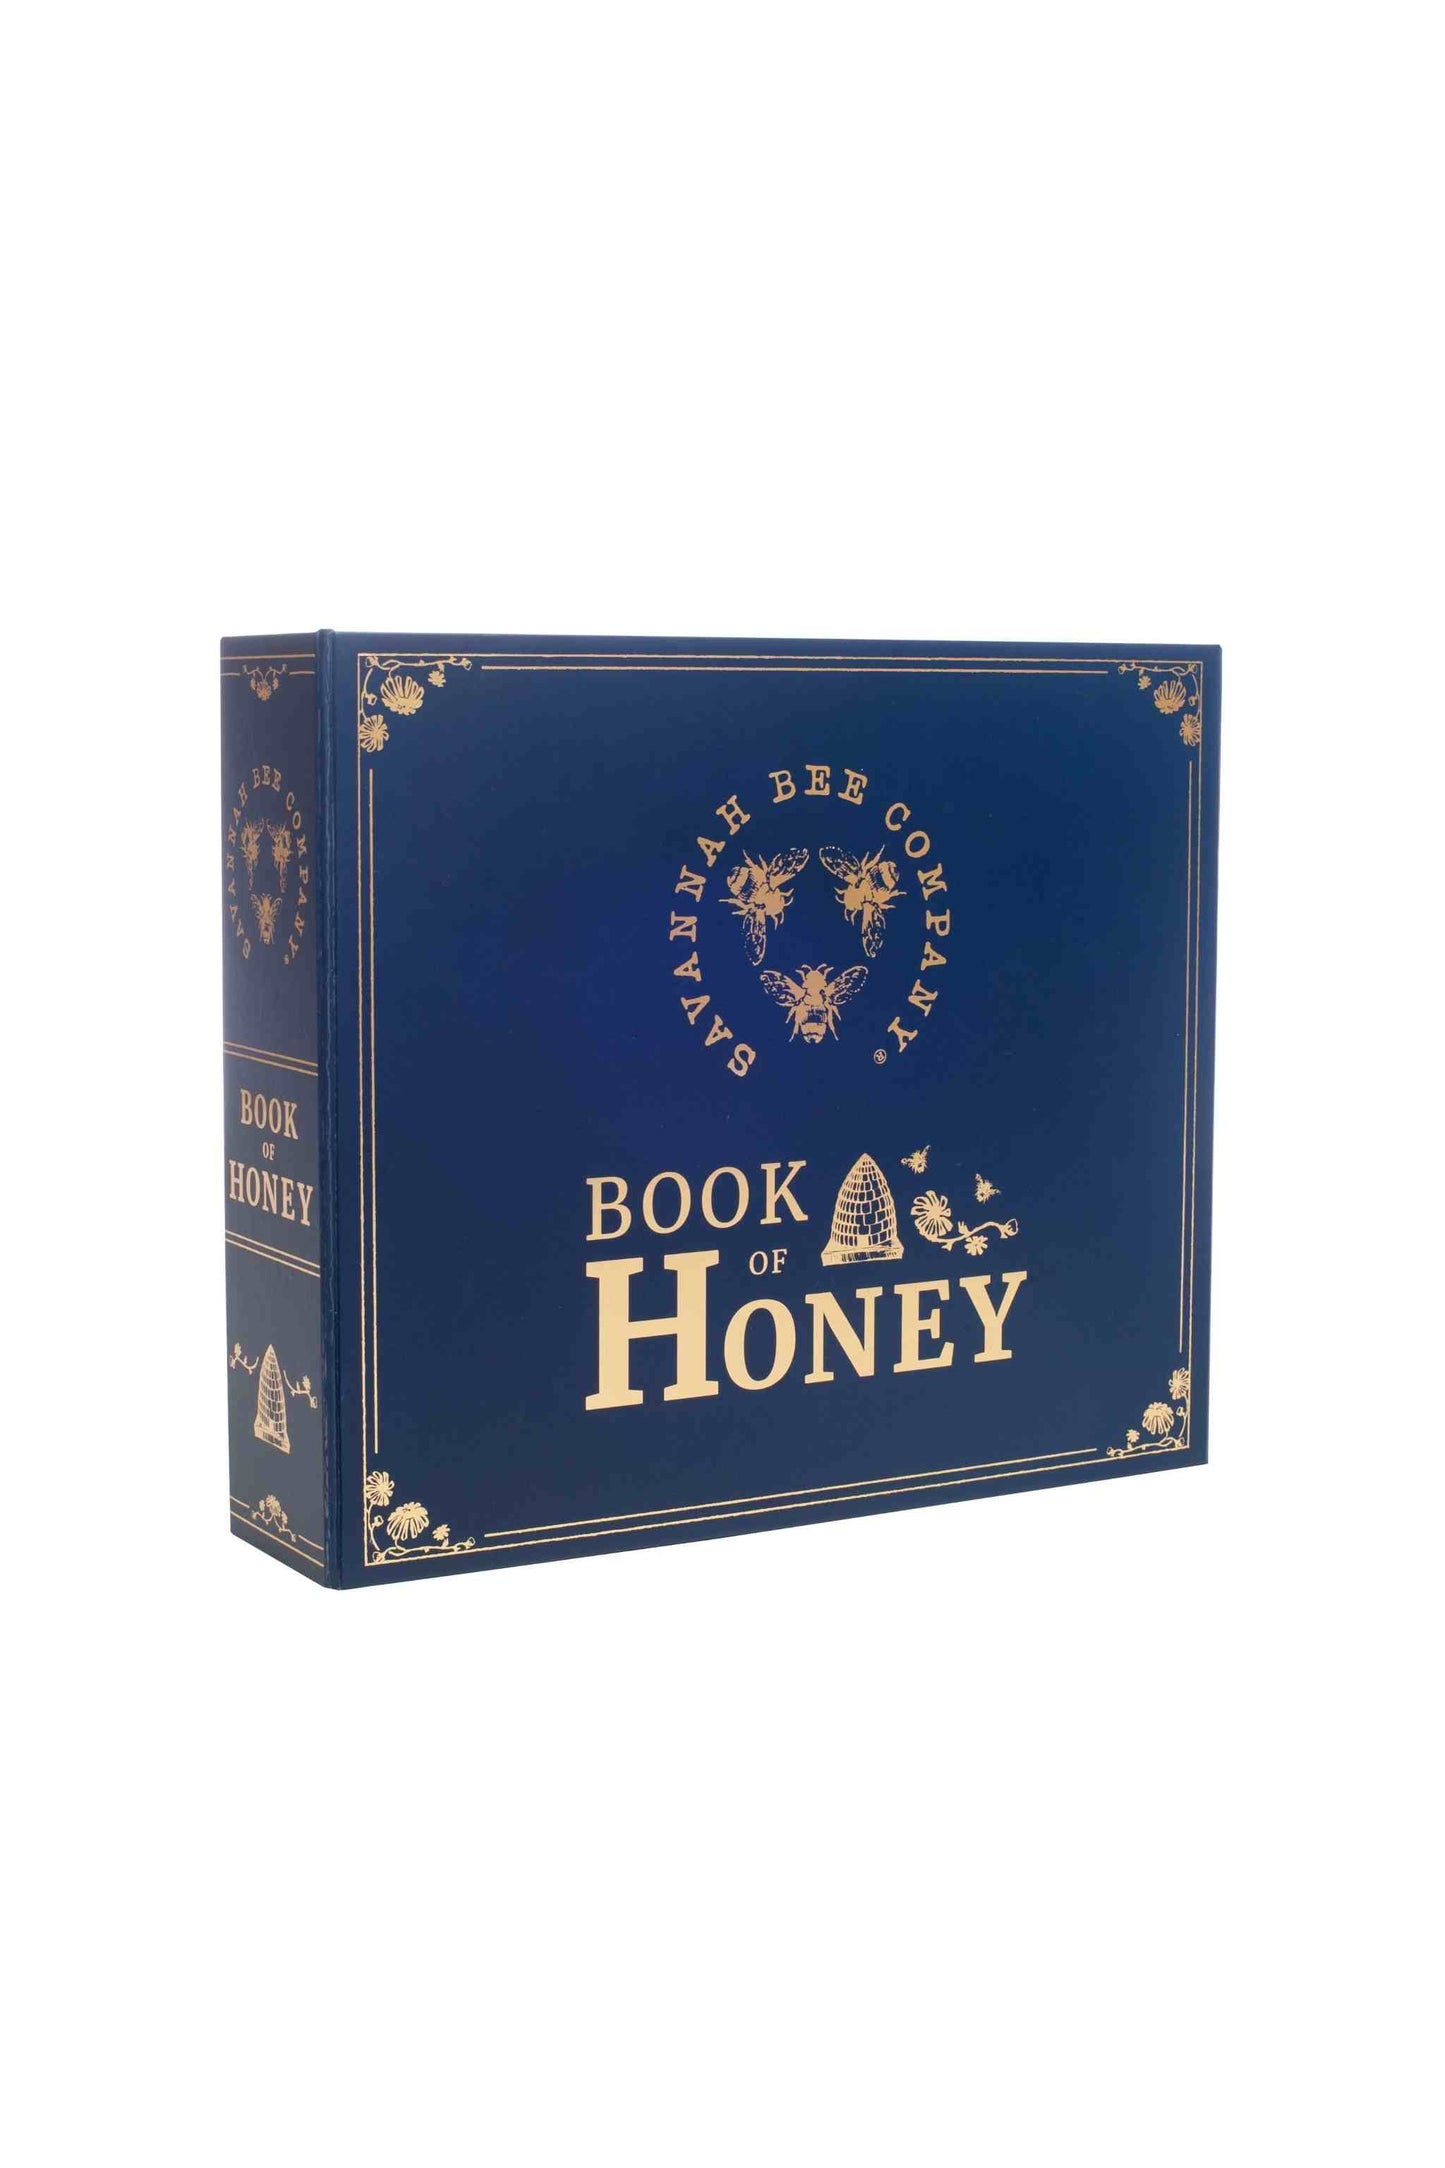 Savannah Bee Company Book Of Honey. The book is navy with gold detailing. 